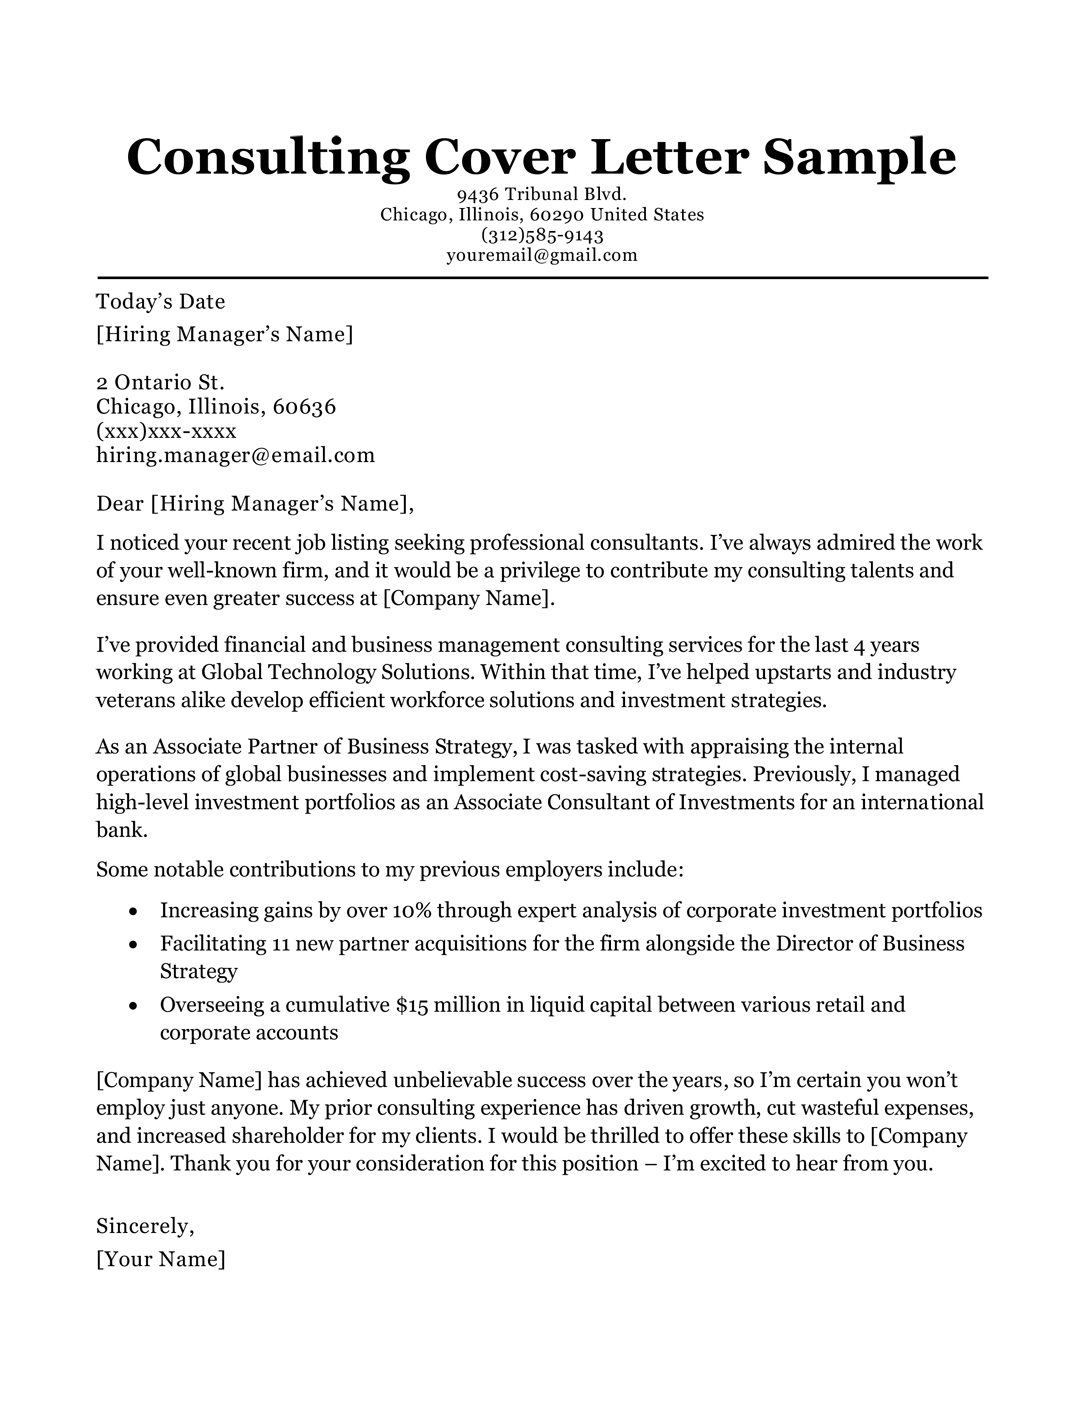 cover letter for job consultant